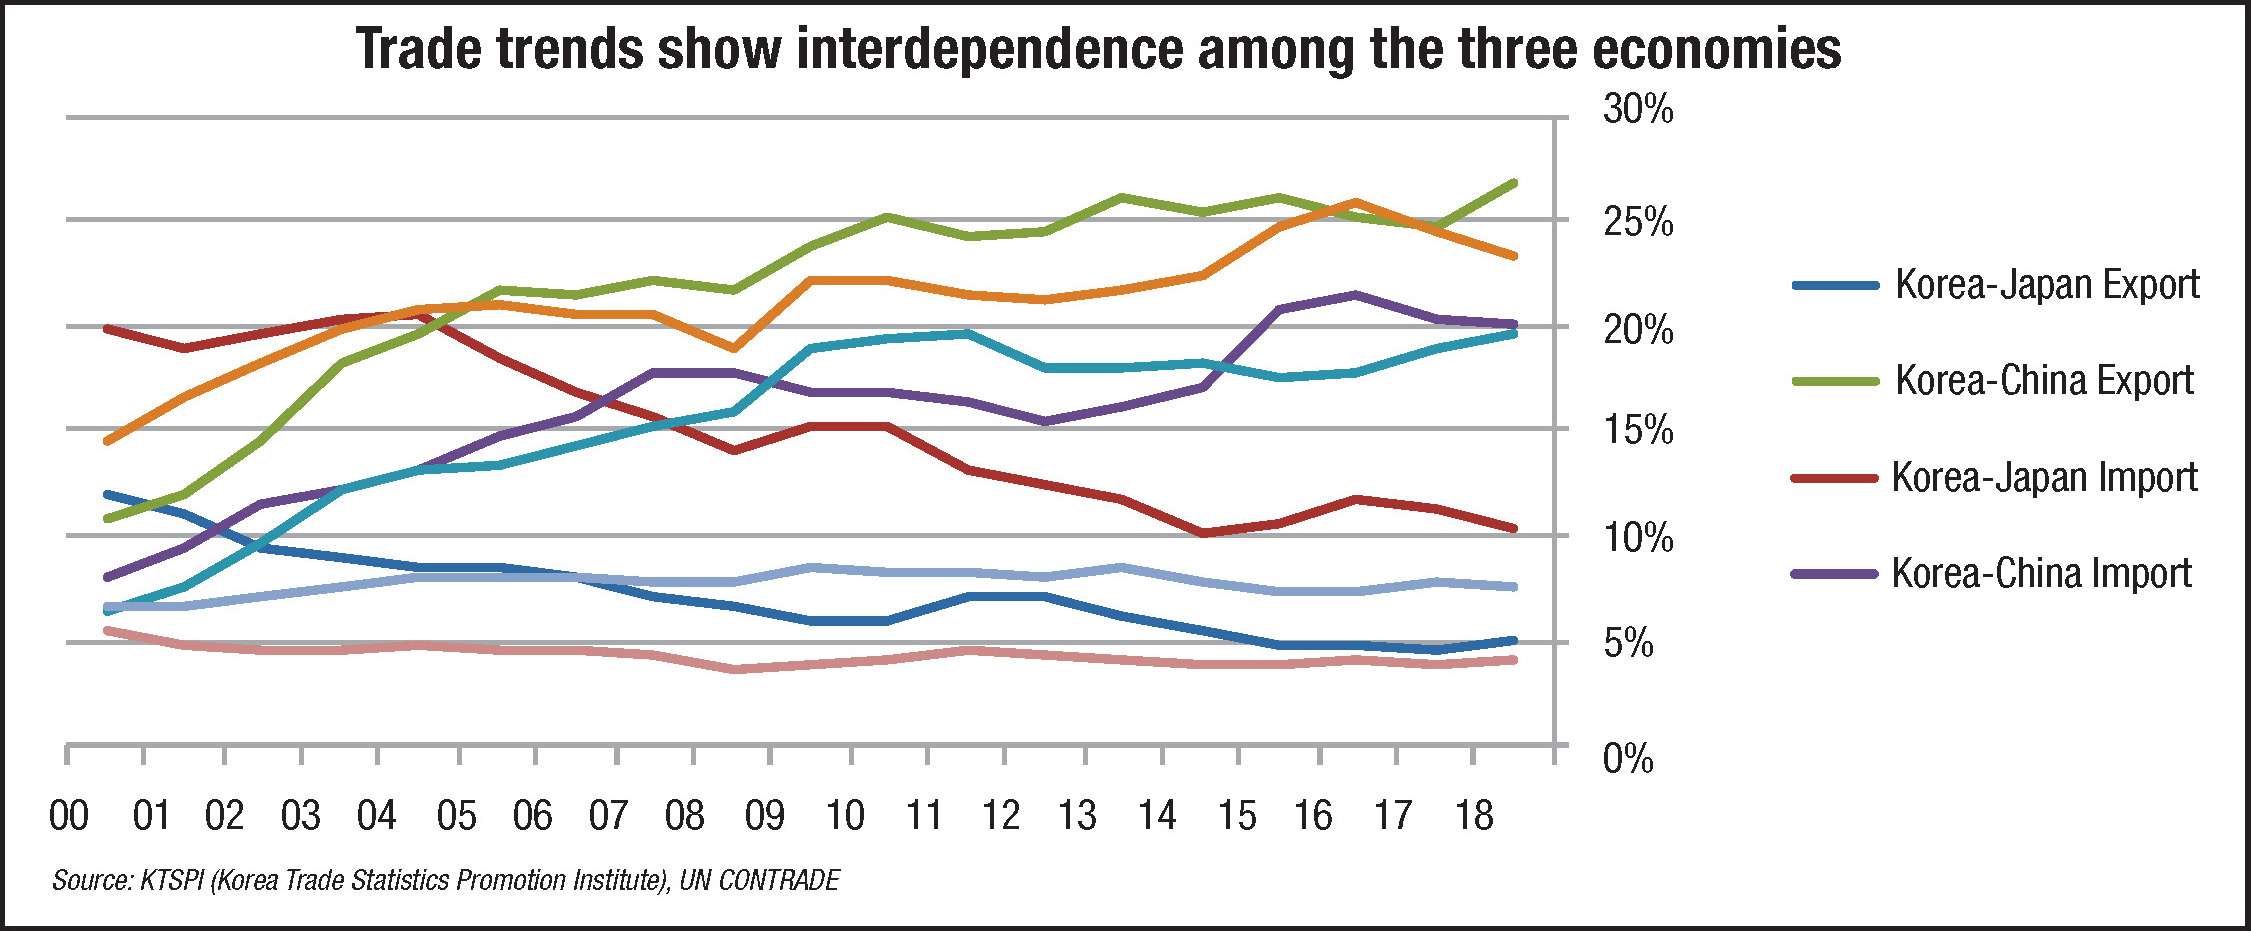 Trade trends show interdependence among the three economies